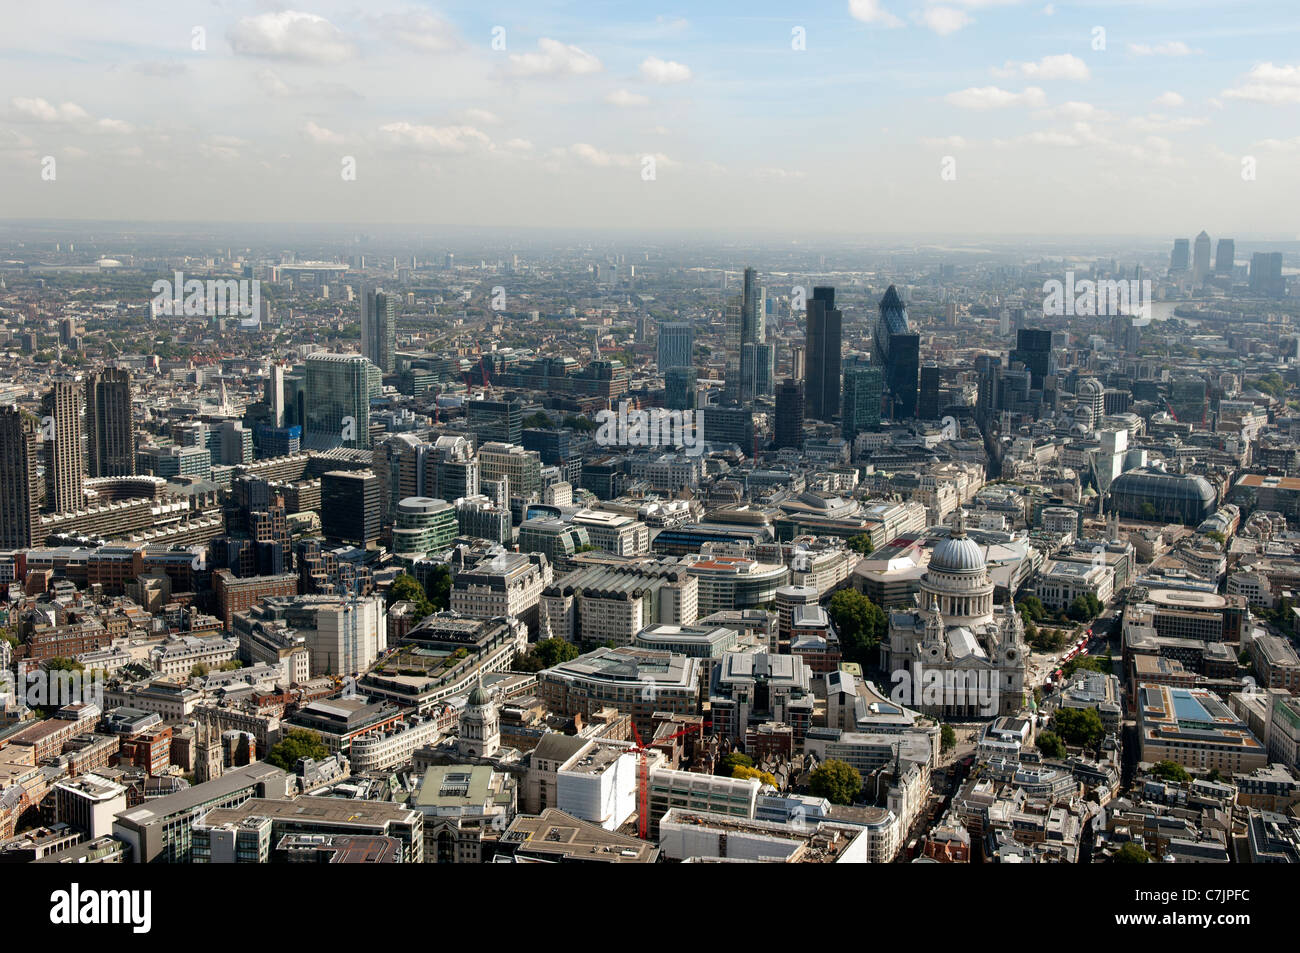 The City of London and the River Thames from the air. Stock Photo